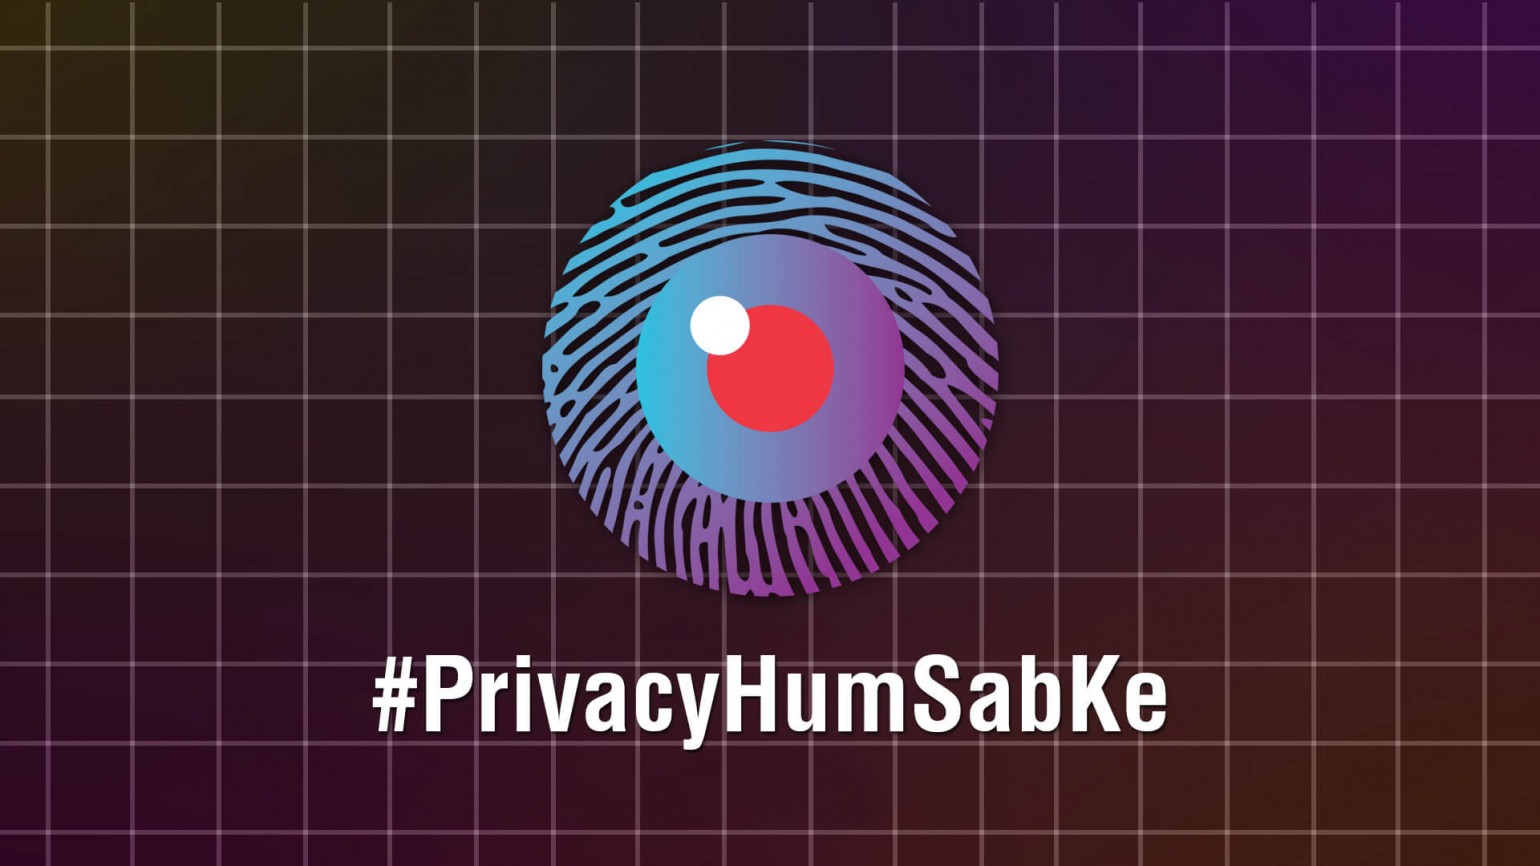 #PrivacyHumSabKe – a campaign on data privacy and protection by Media Matters for Democracy